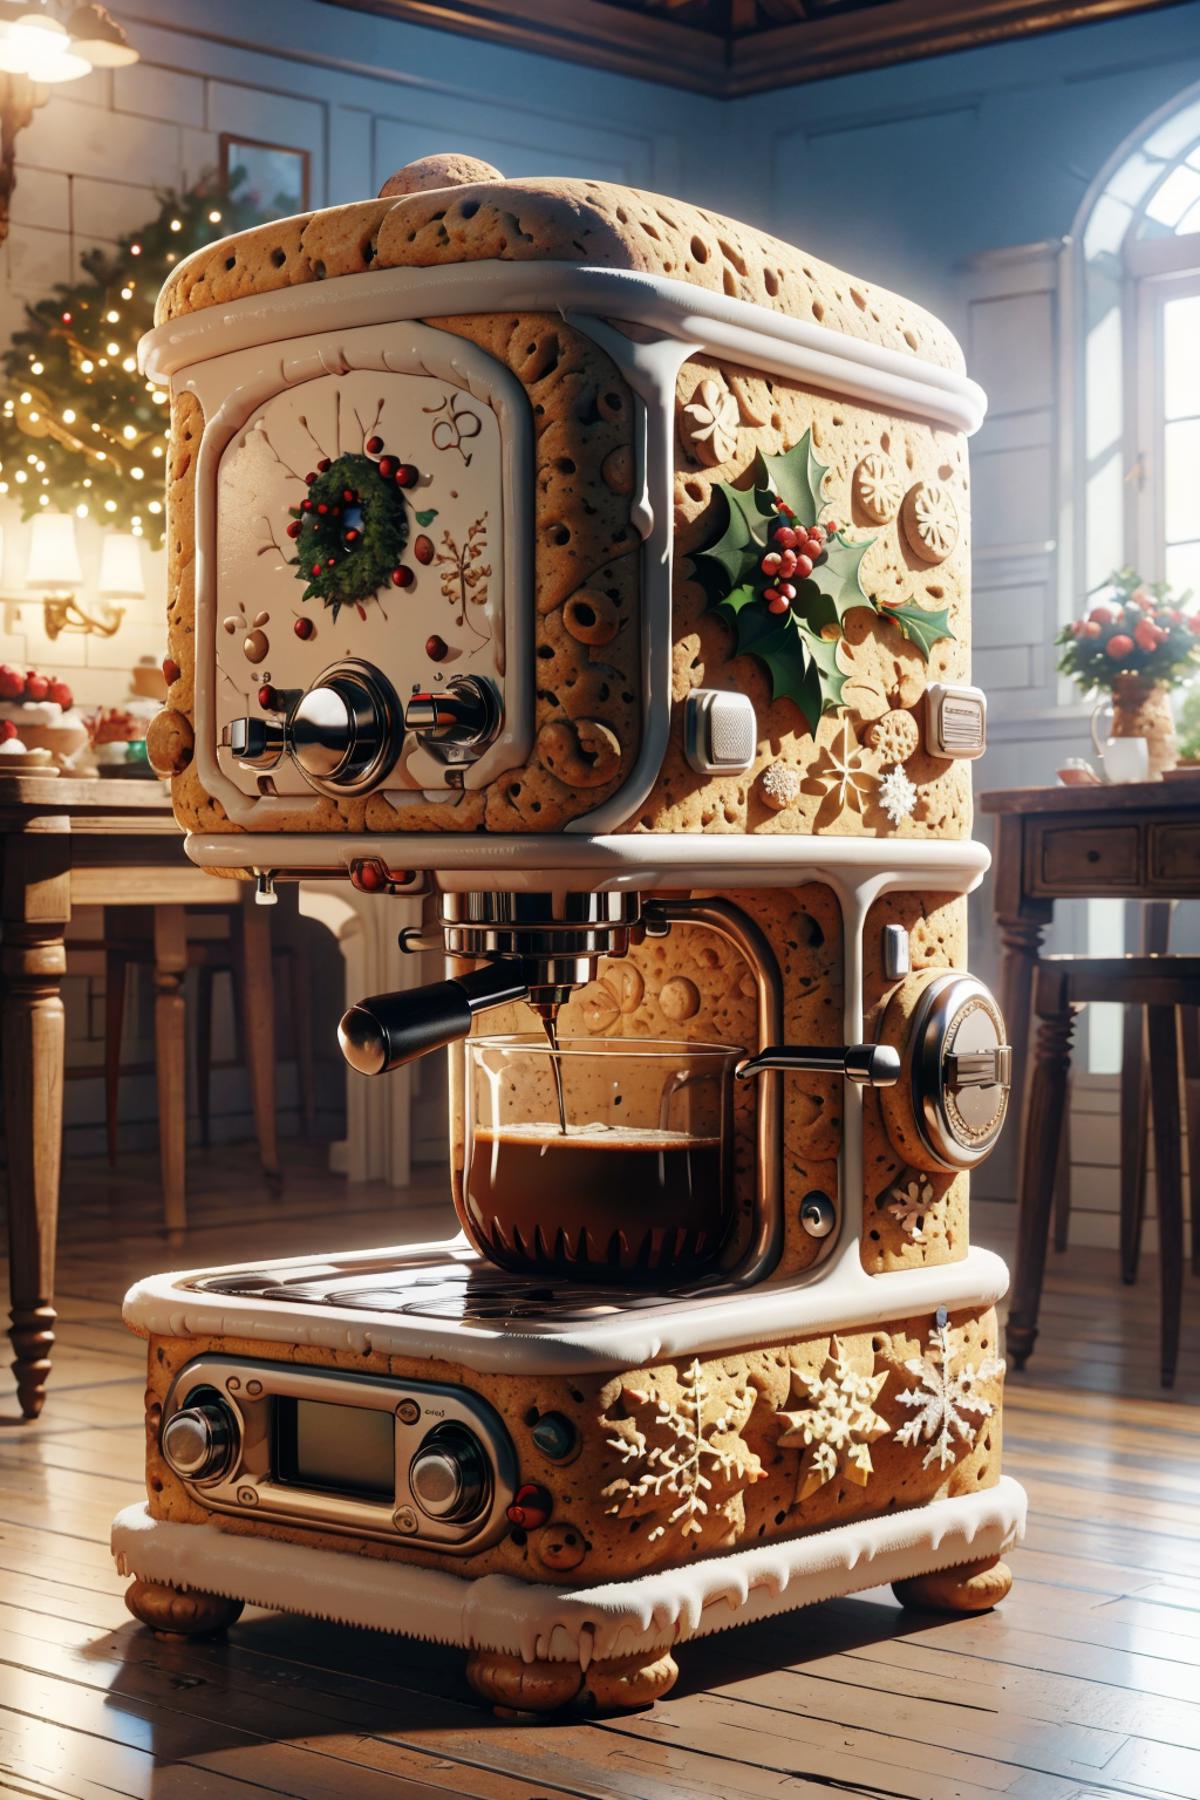 A coffee maker with a Christmas theme, featuring a candy-themed design and a holiday scene in the background, including a table with potted plants and vases.